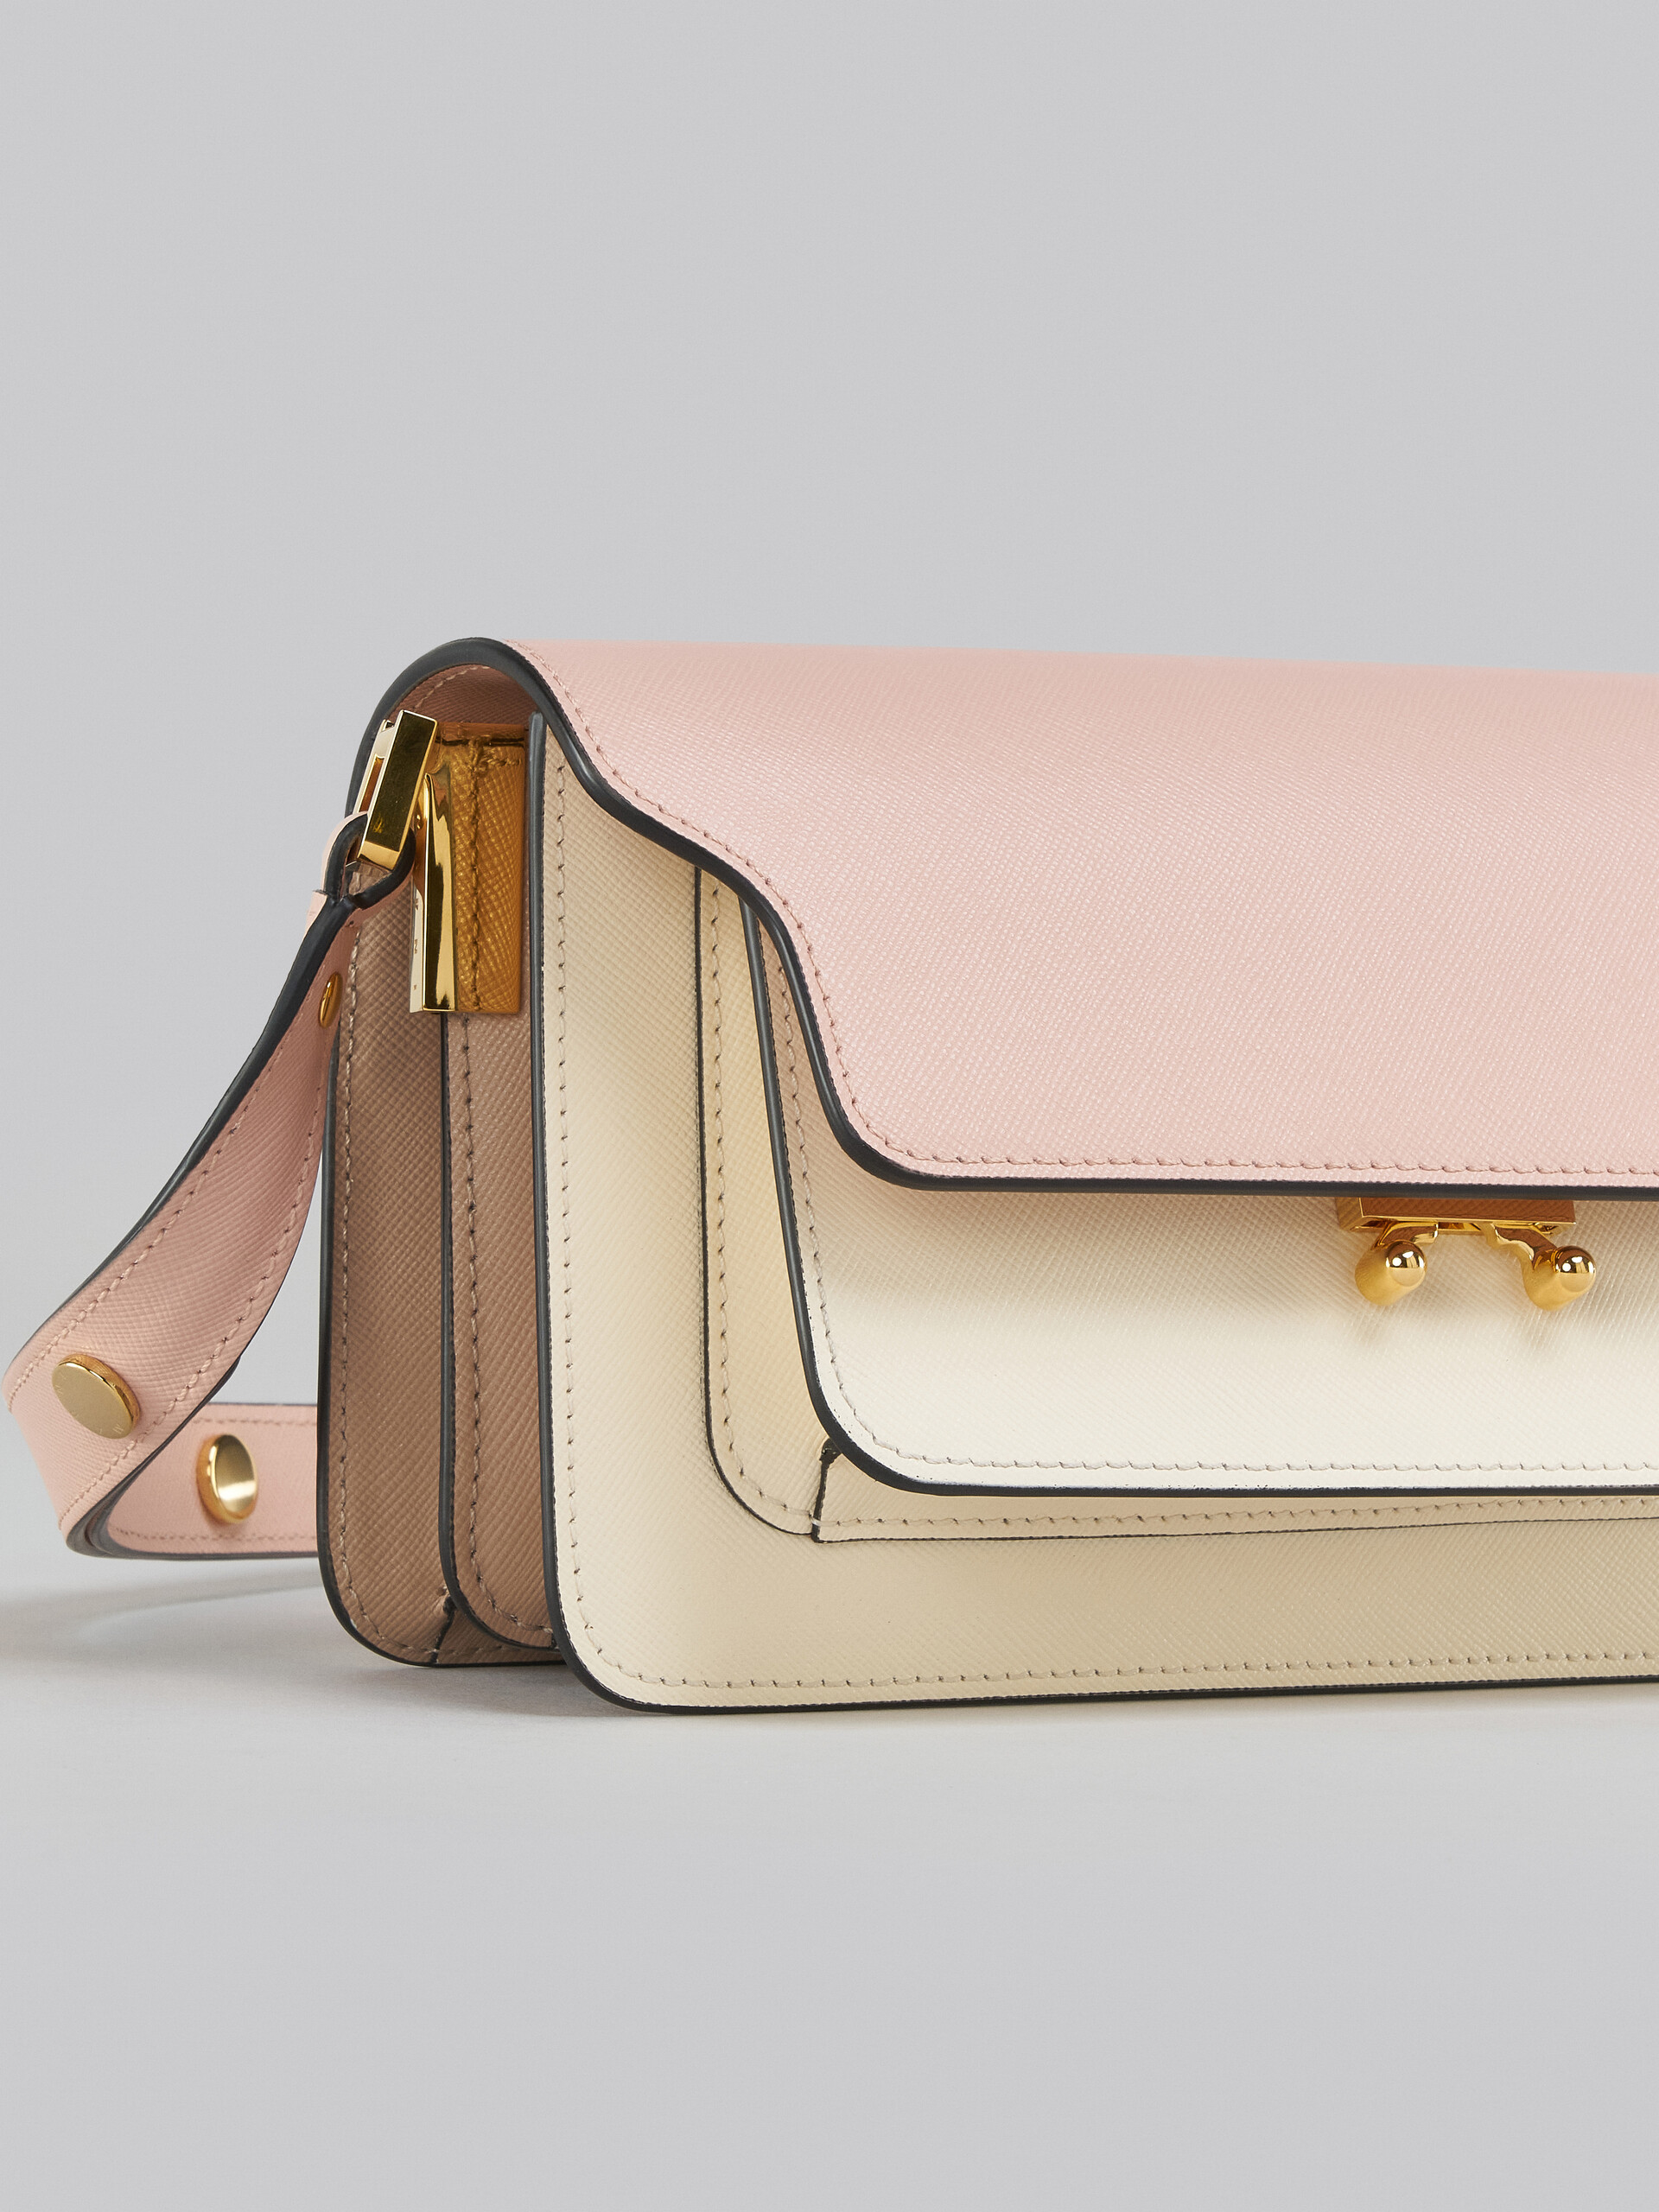 Trunk Bag E/W in pink and white saffiano leather - Shoulder Bag - Image 5